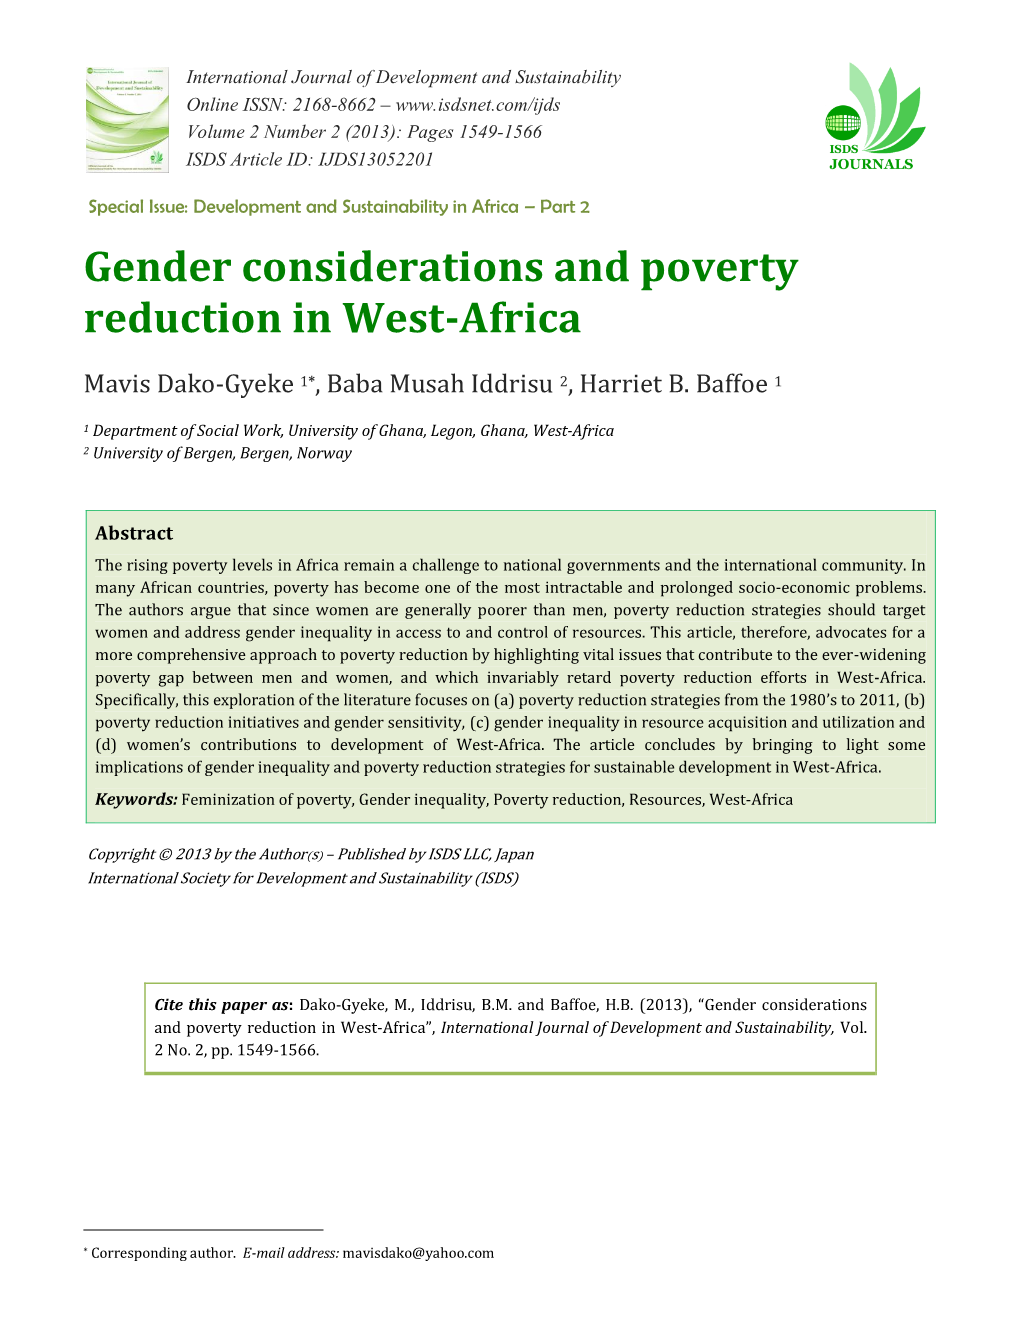 Gender Considerations and Poverty Reduction in West-Africa